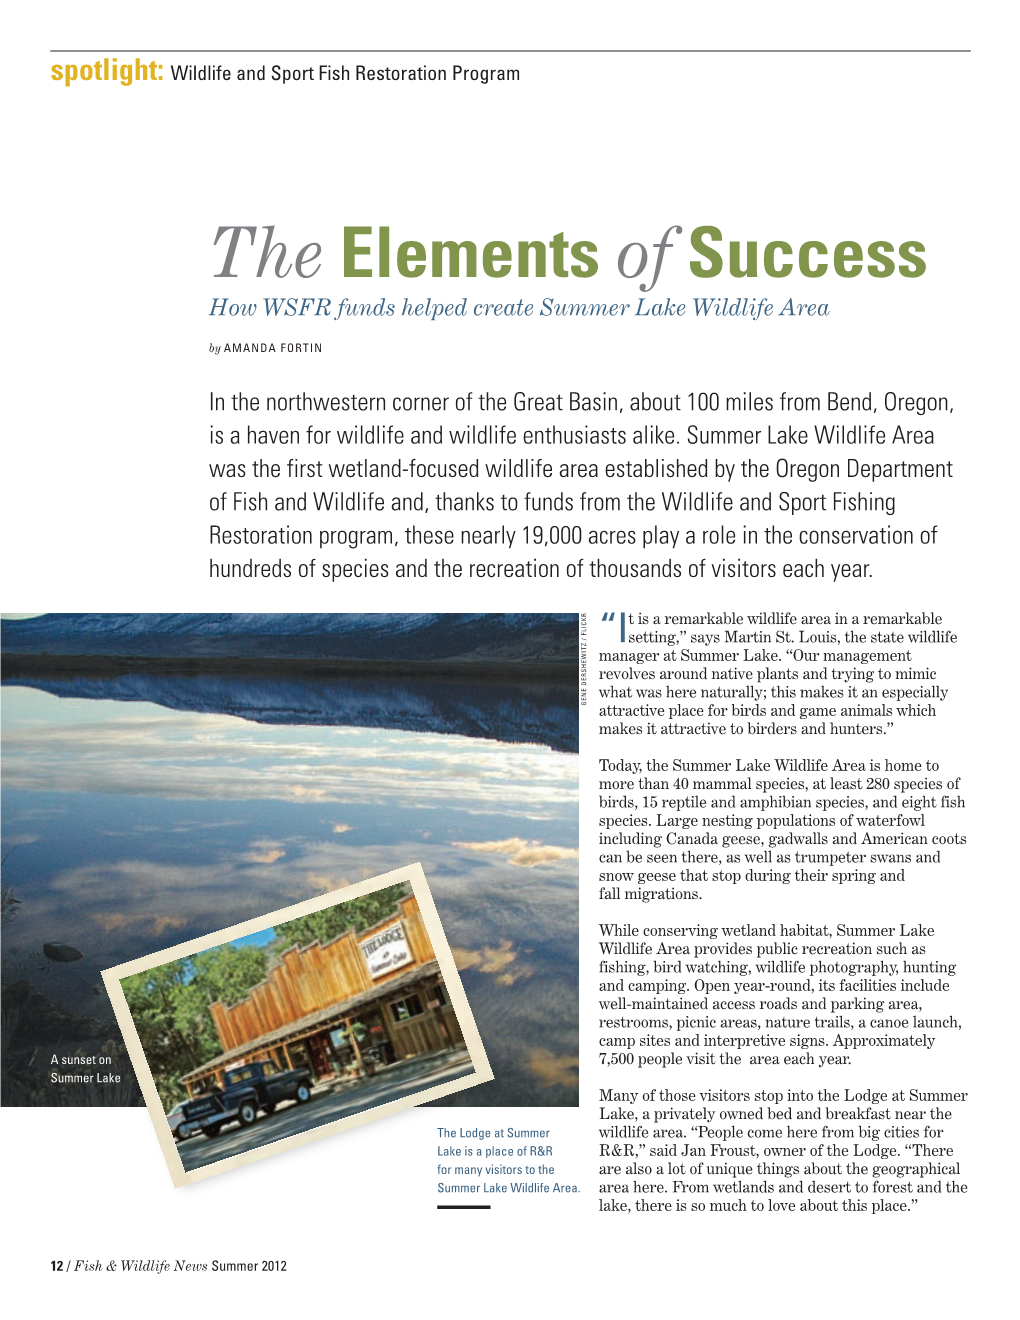 The Elements of Success How WSFR Funds Helped Create Summer Lake Wildlife Area